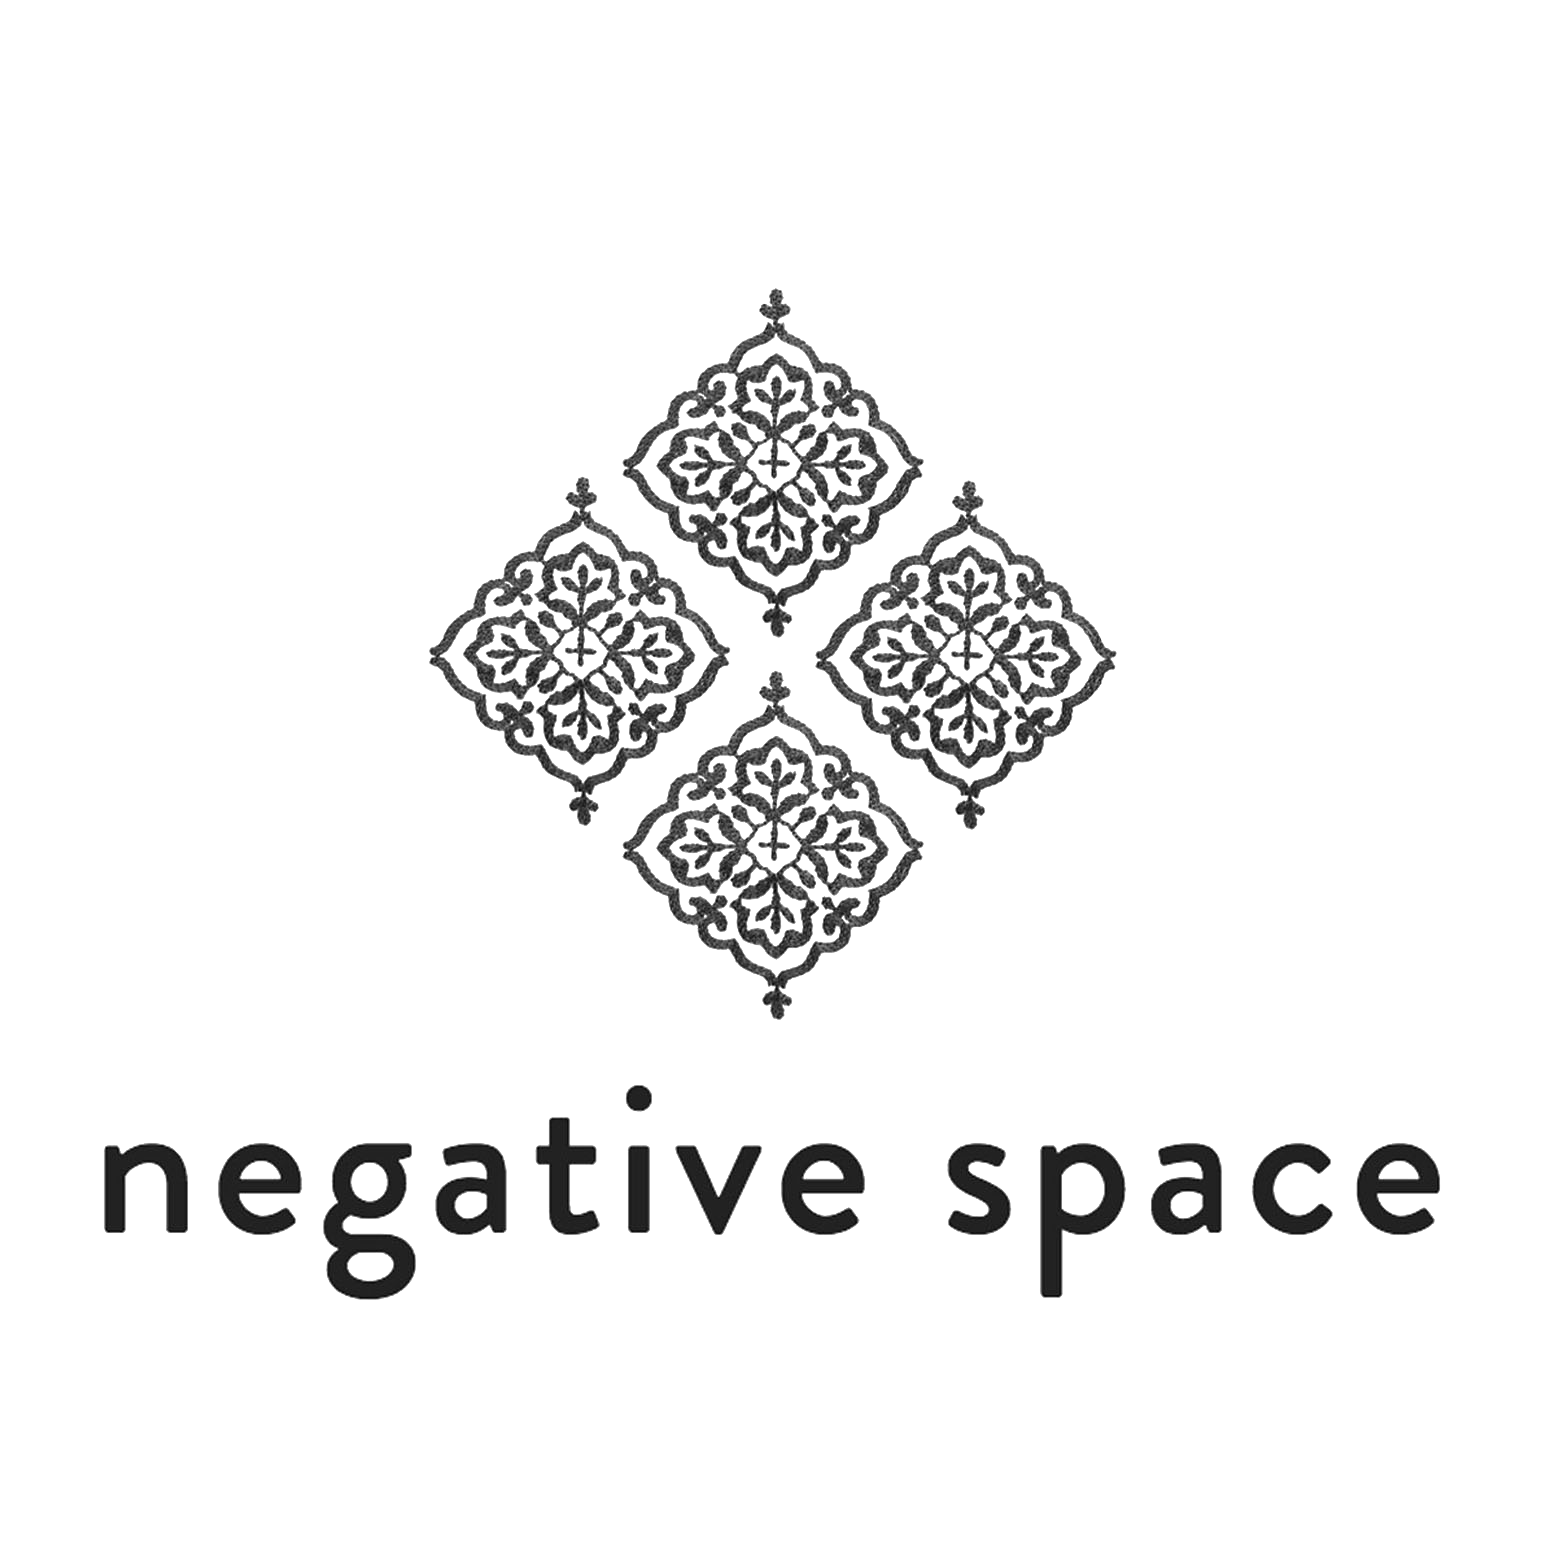 The Negative Space logo